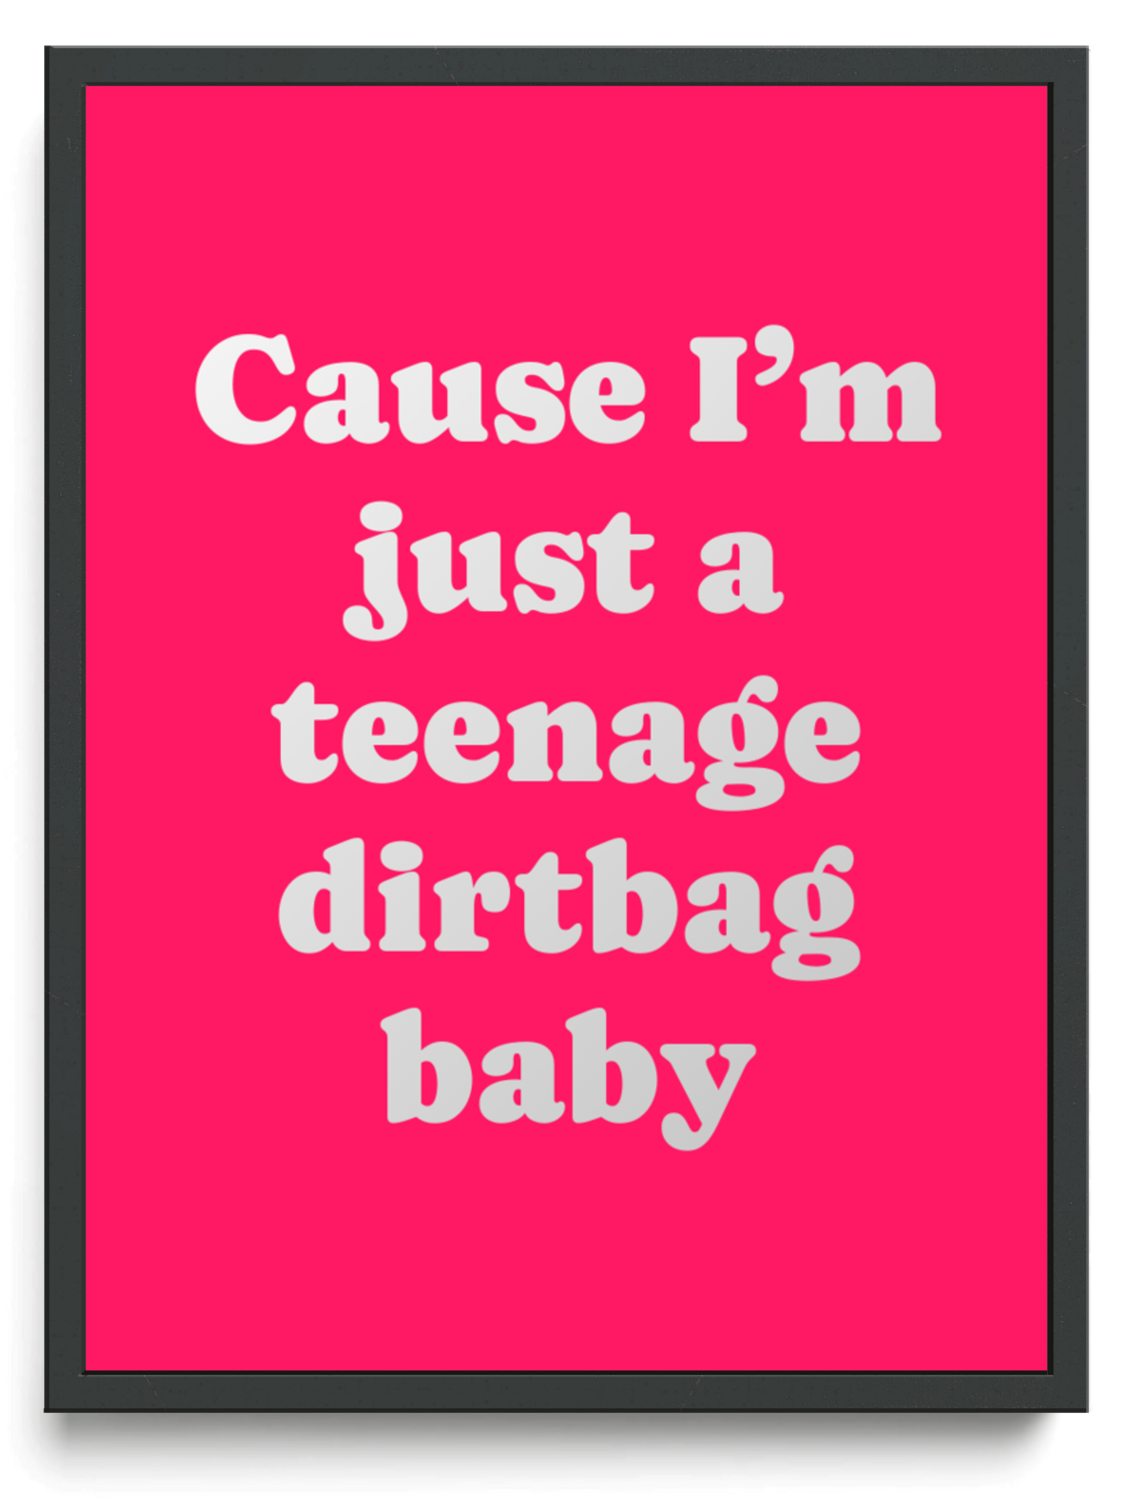 Cause Im just a teenage dirtbag baby framed typographic print